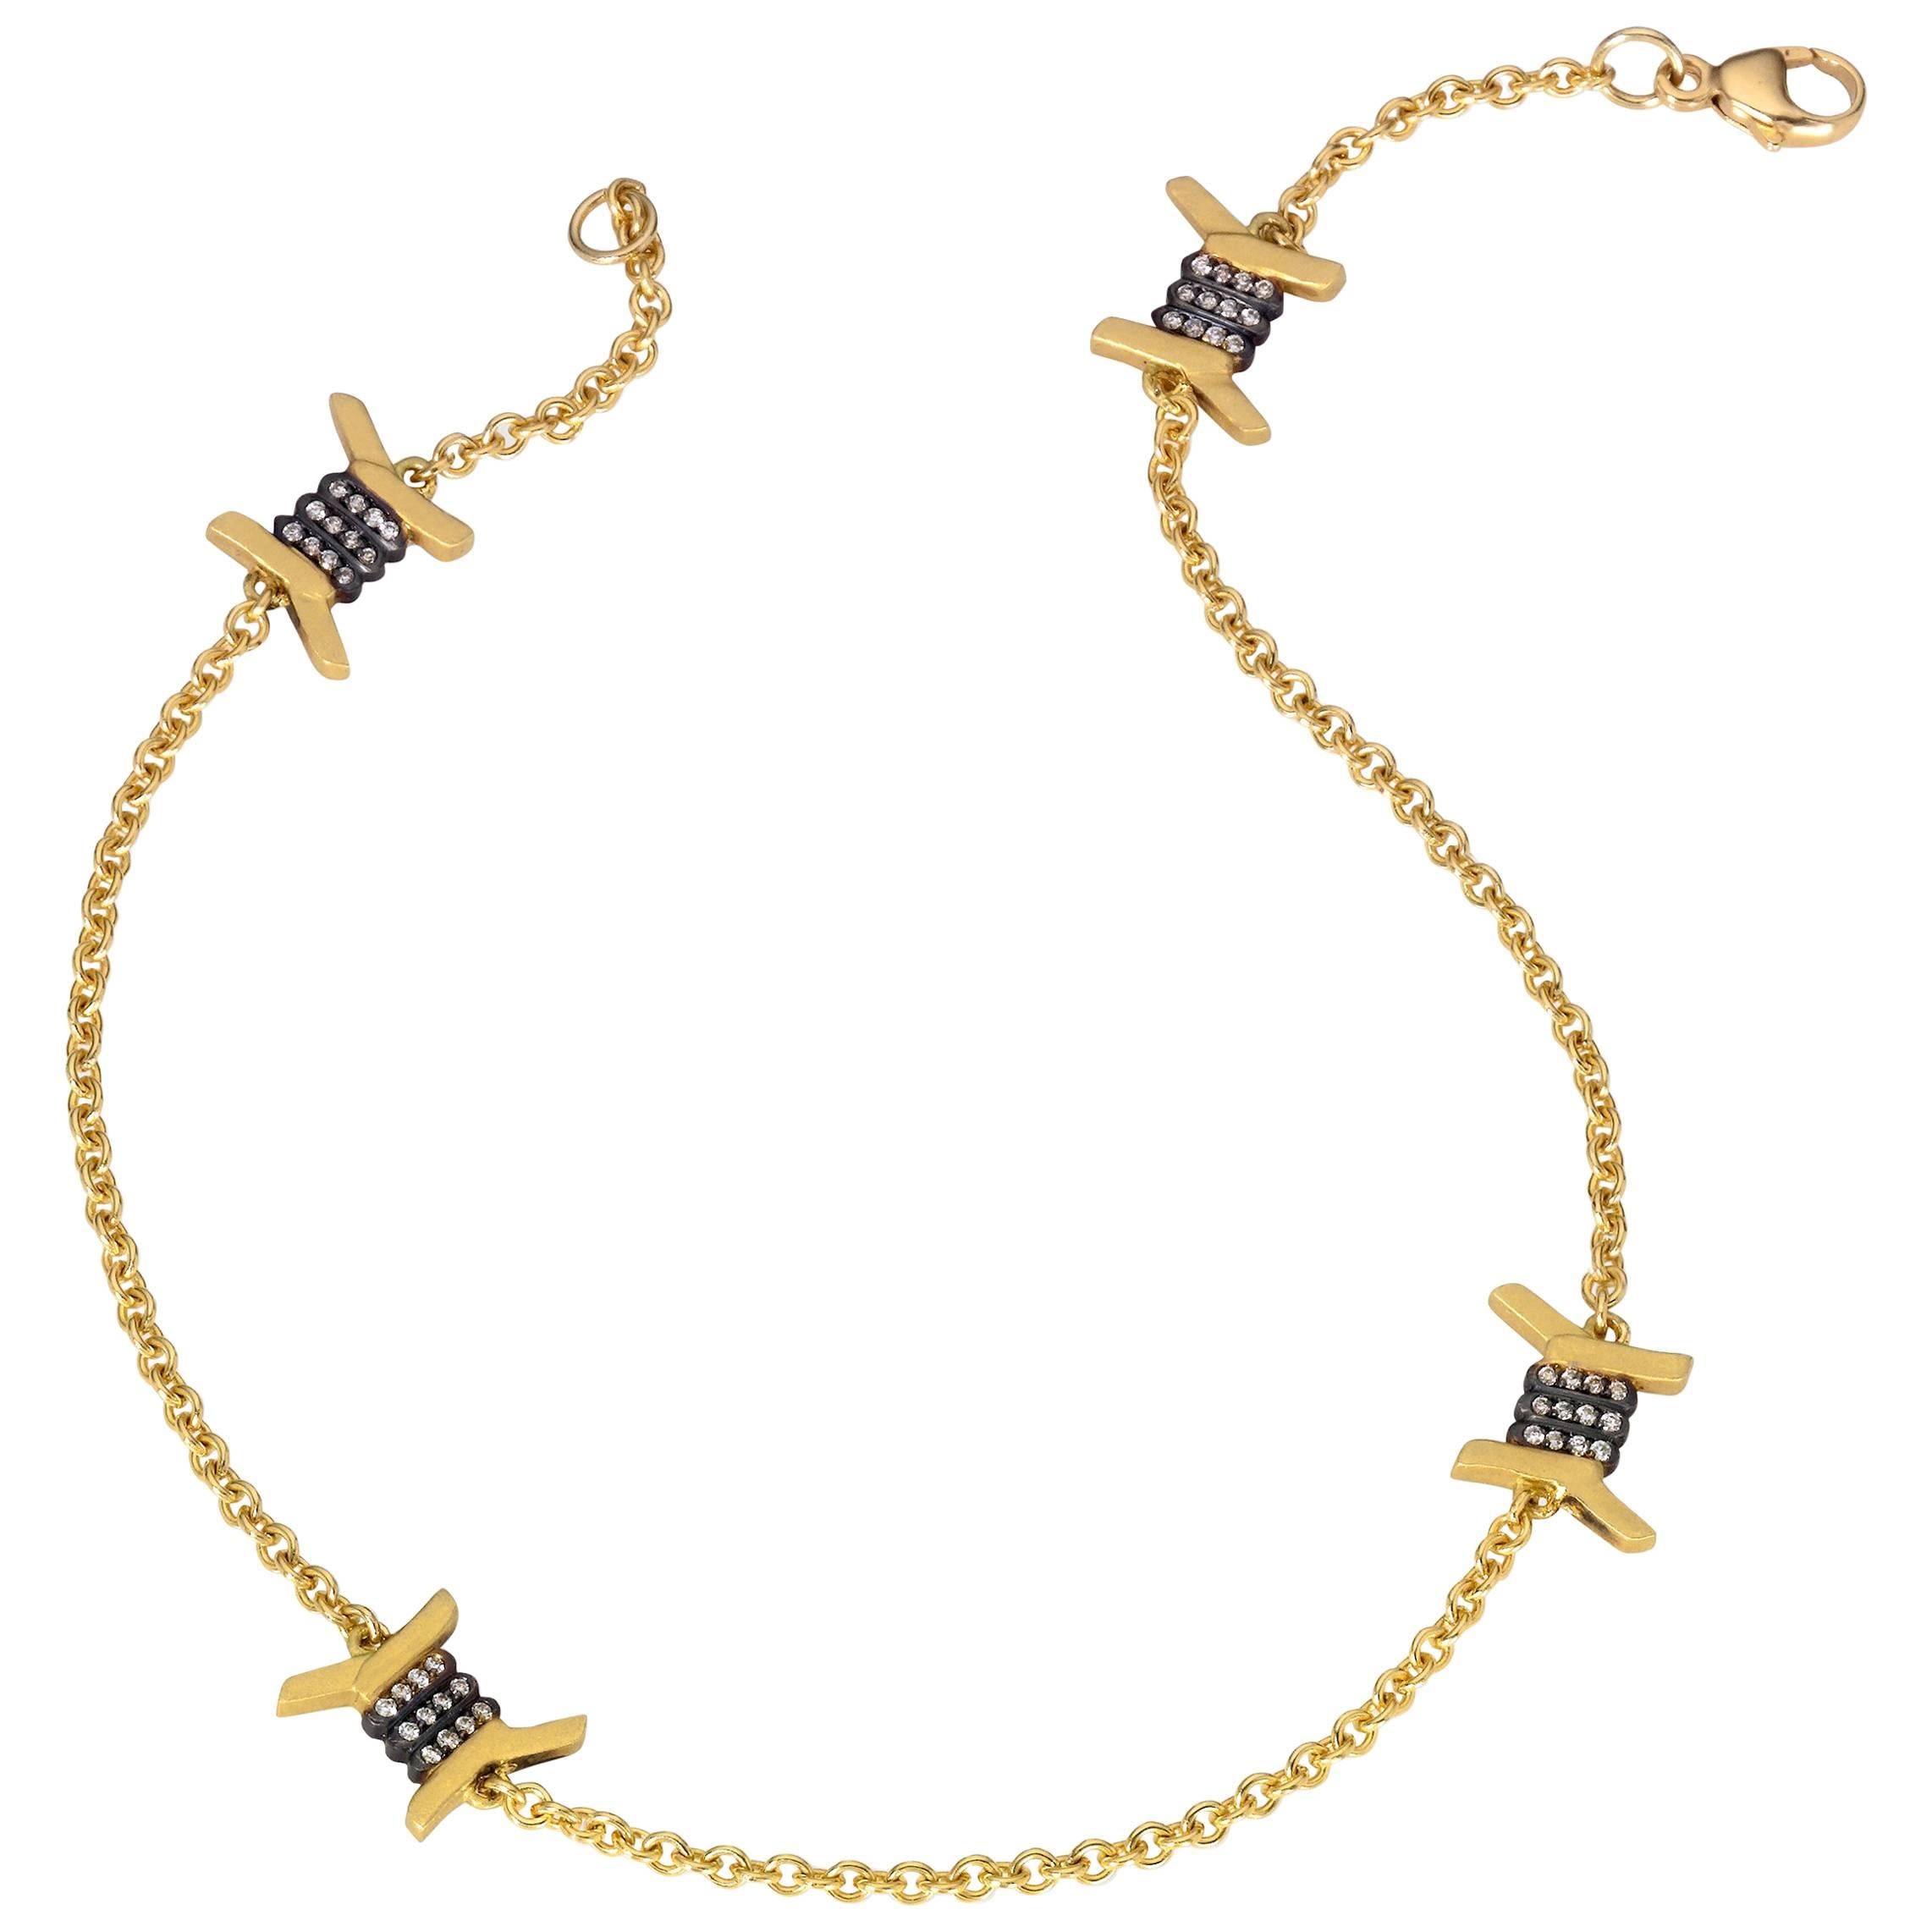 Wendy Brandes Barbed Wire Diamond and 18K Yellow Gold Ankle Bracelet/Anklet